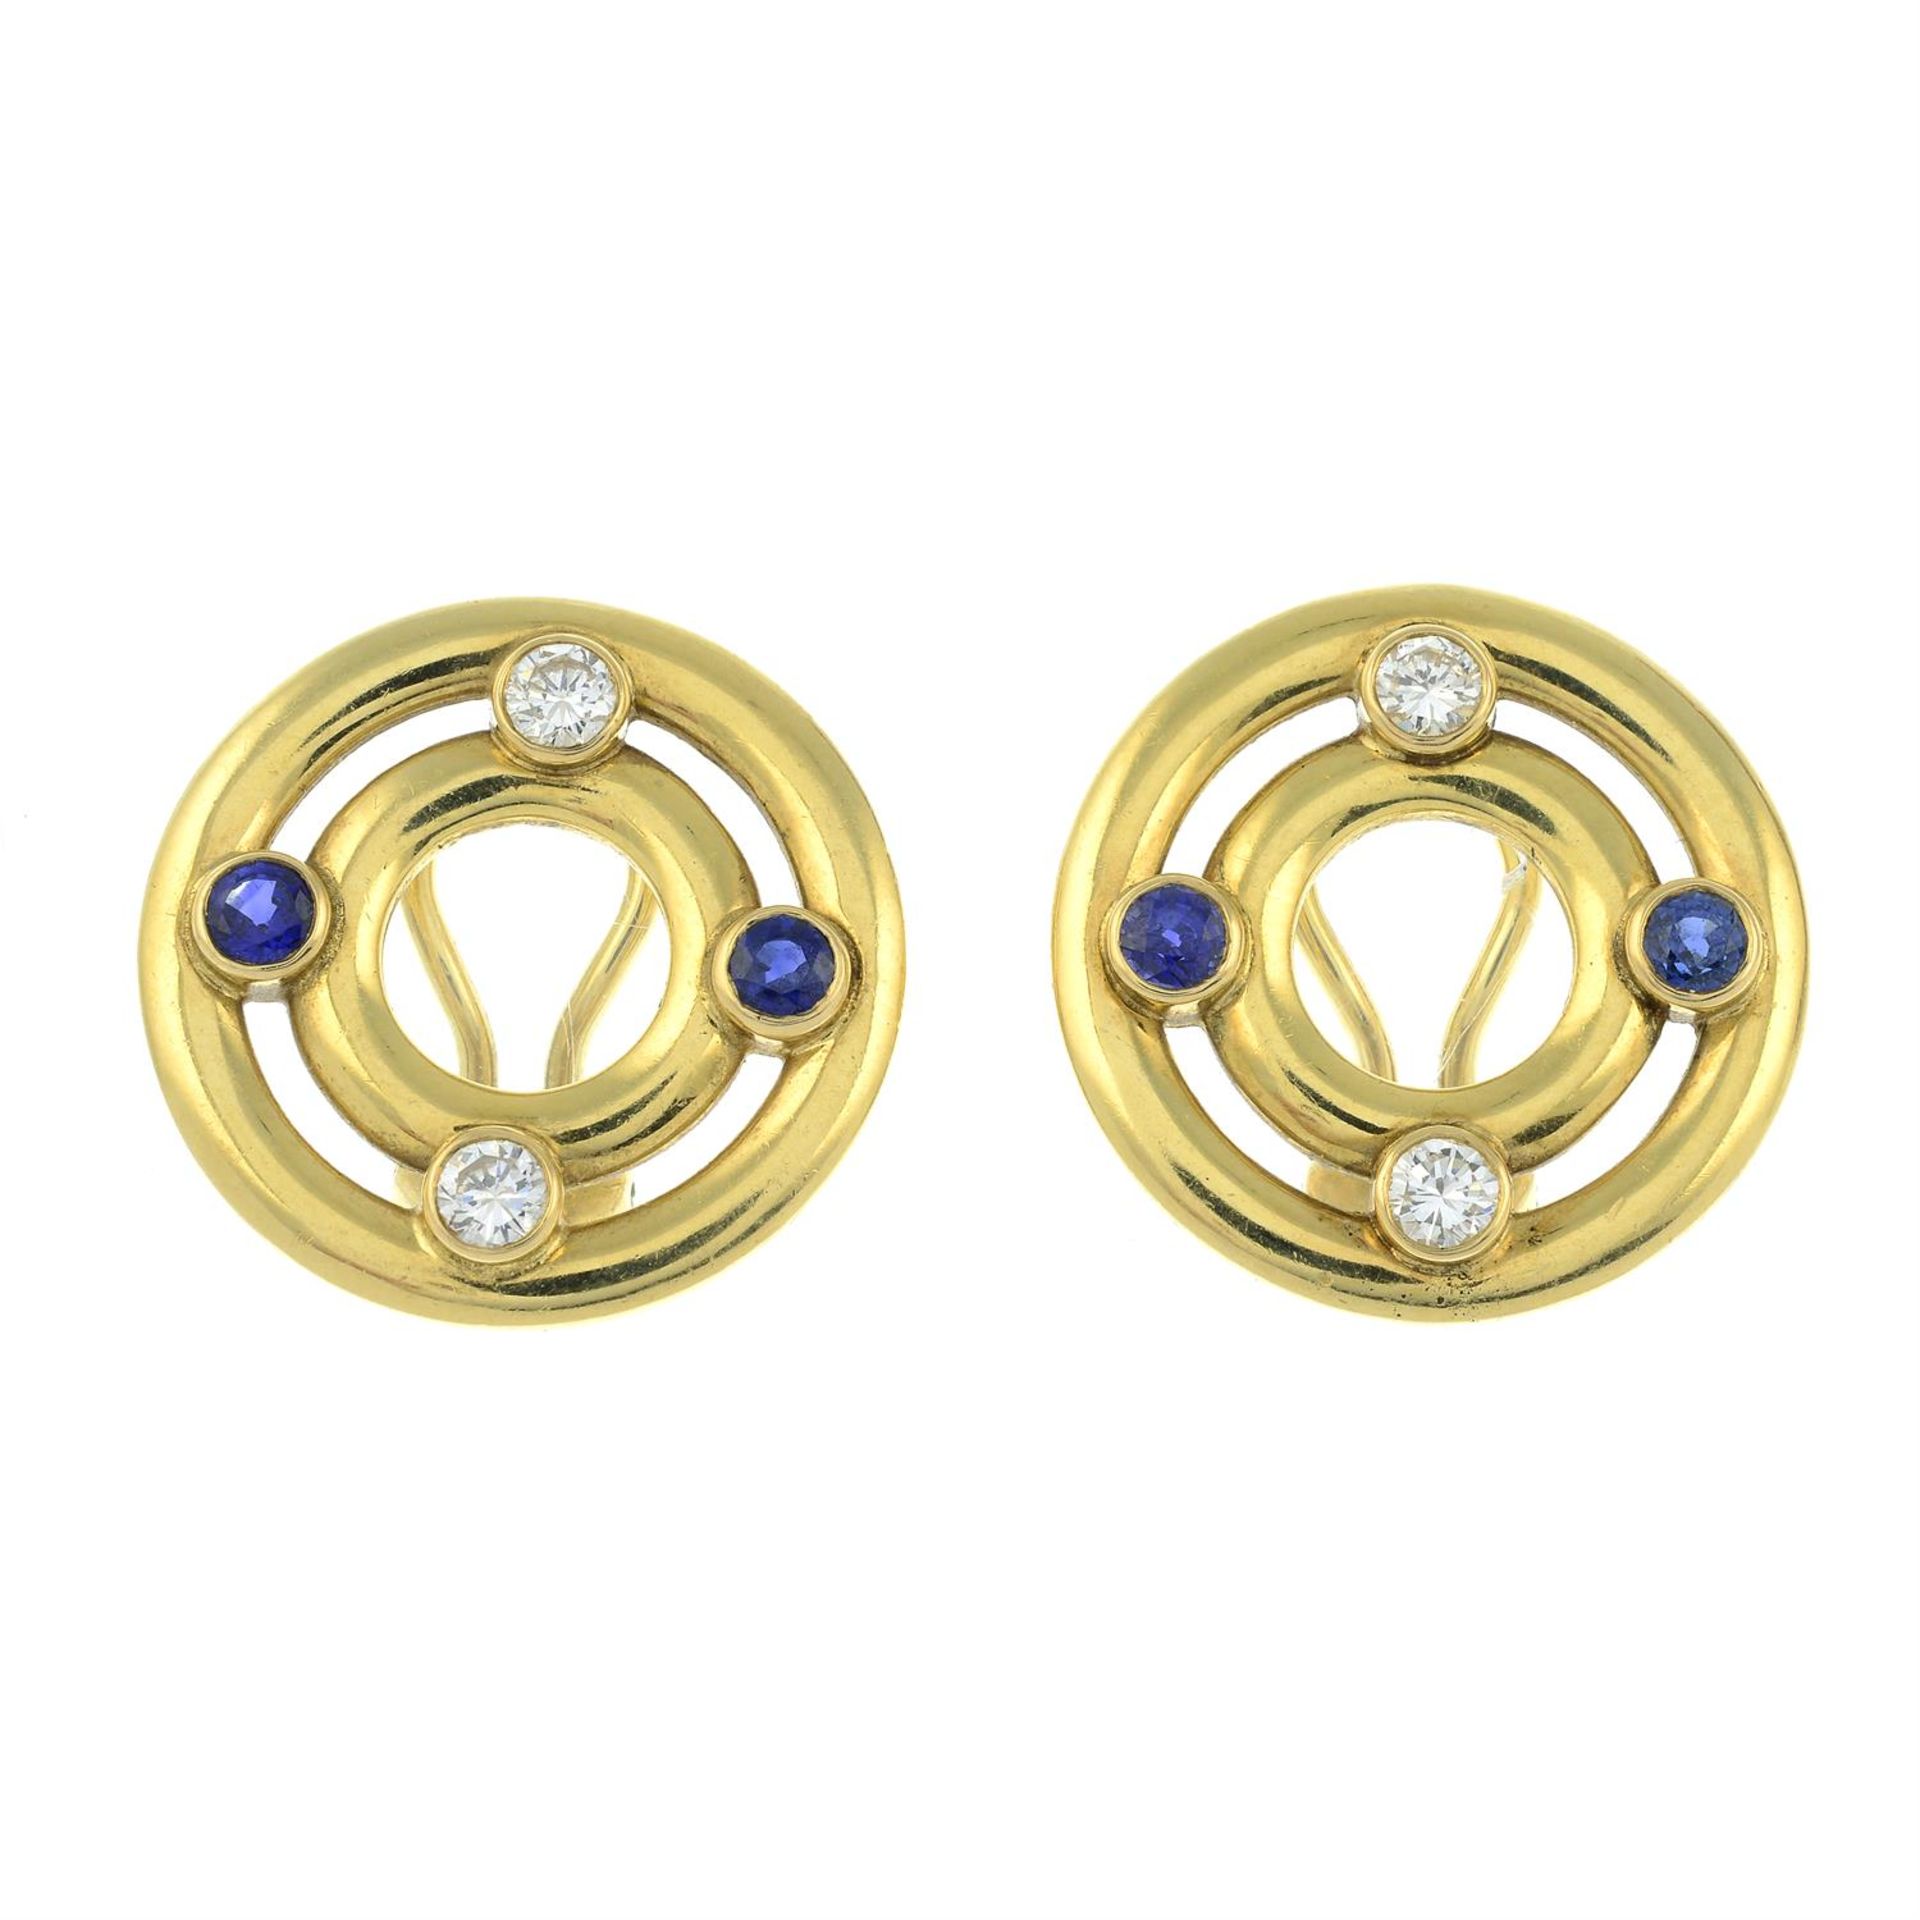 A pair of 18ct gold brilliant-cut diamond and sapphire 'Twain' earrings, by Theo Fennell. - Image 2 of 3